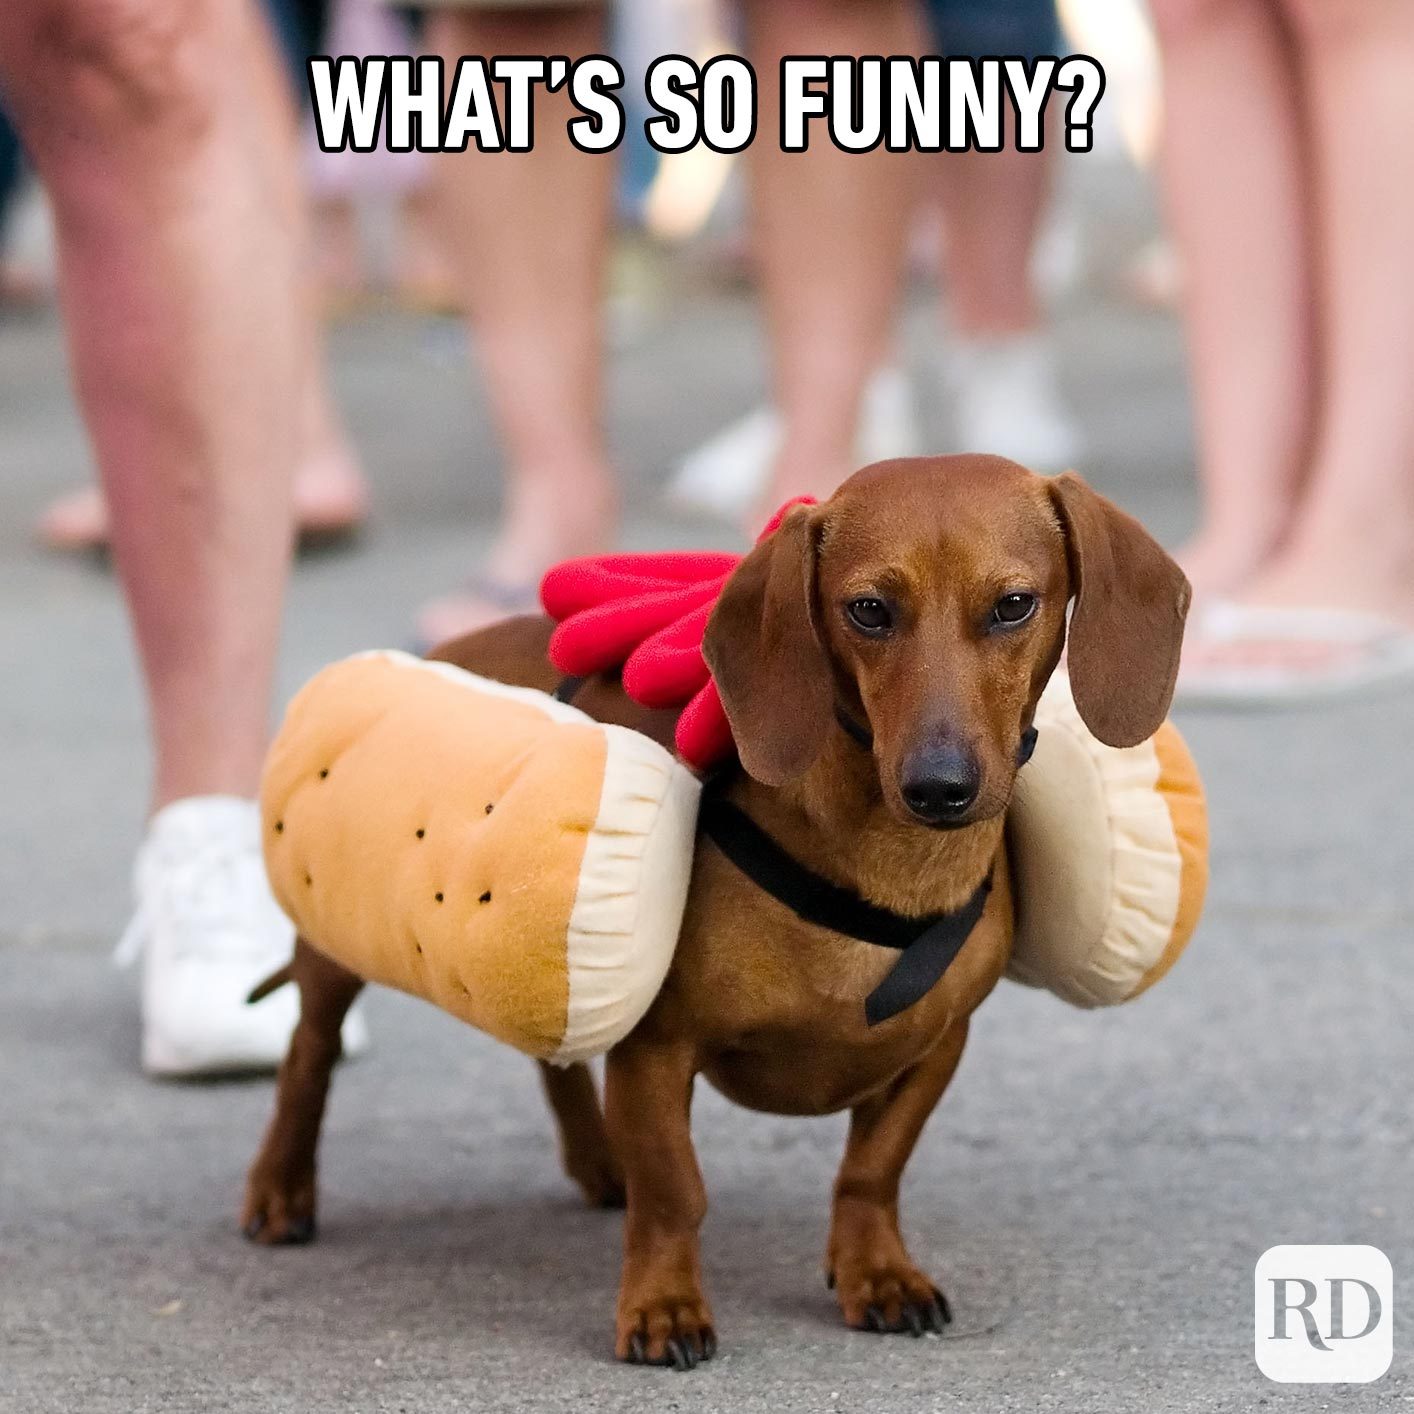 Weiner dog in hot dog costume. Meme text: What's so funny?